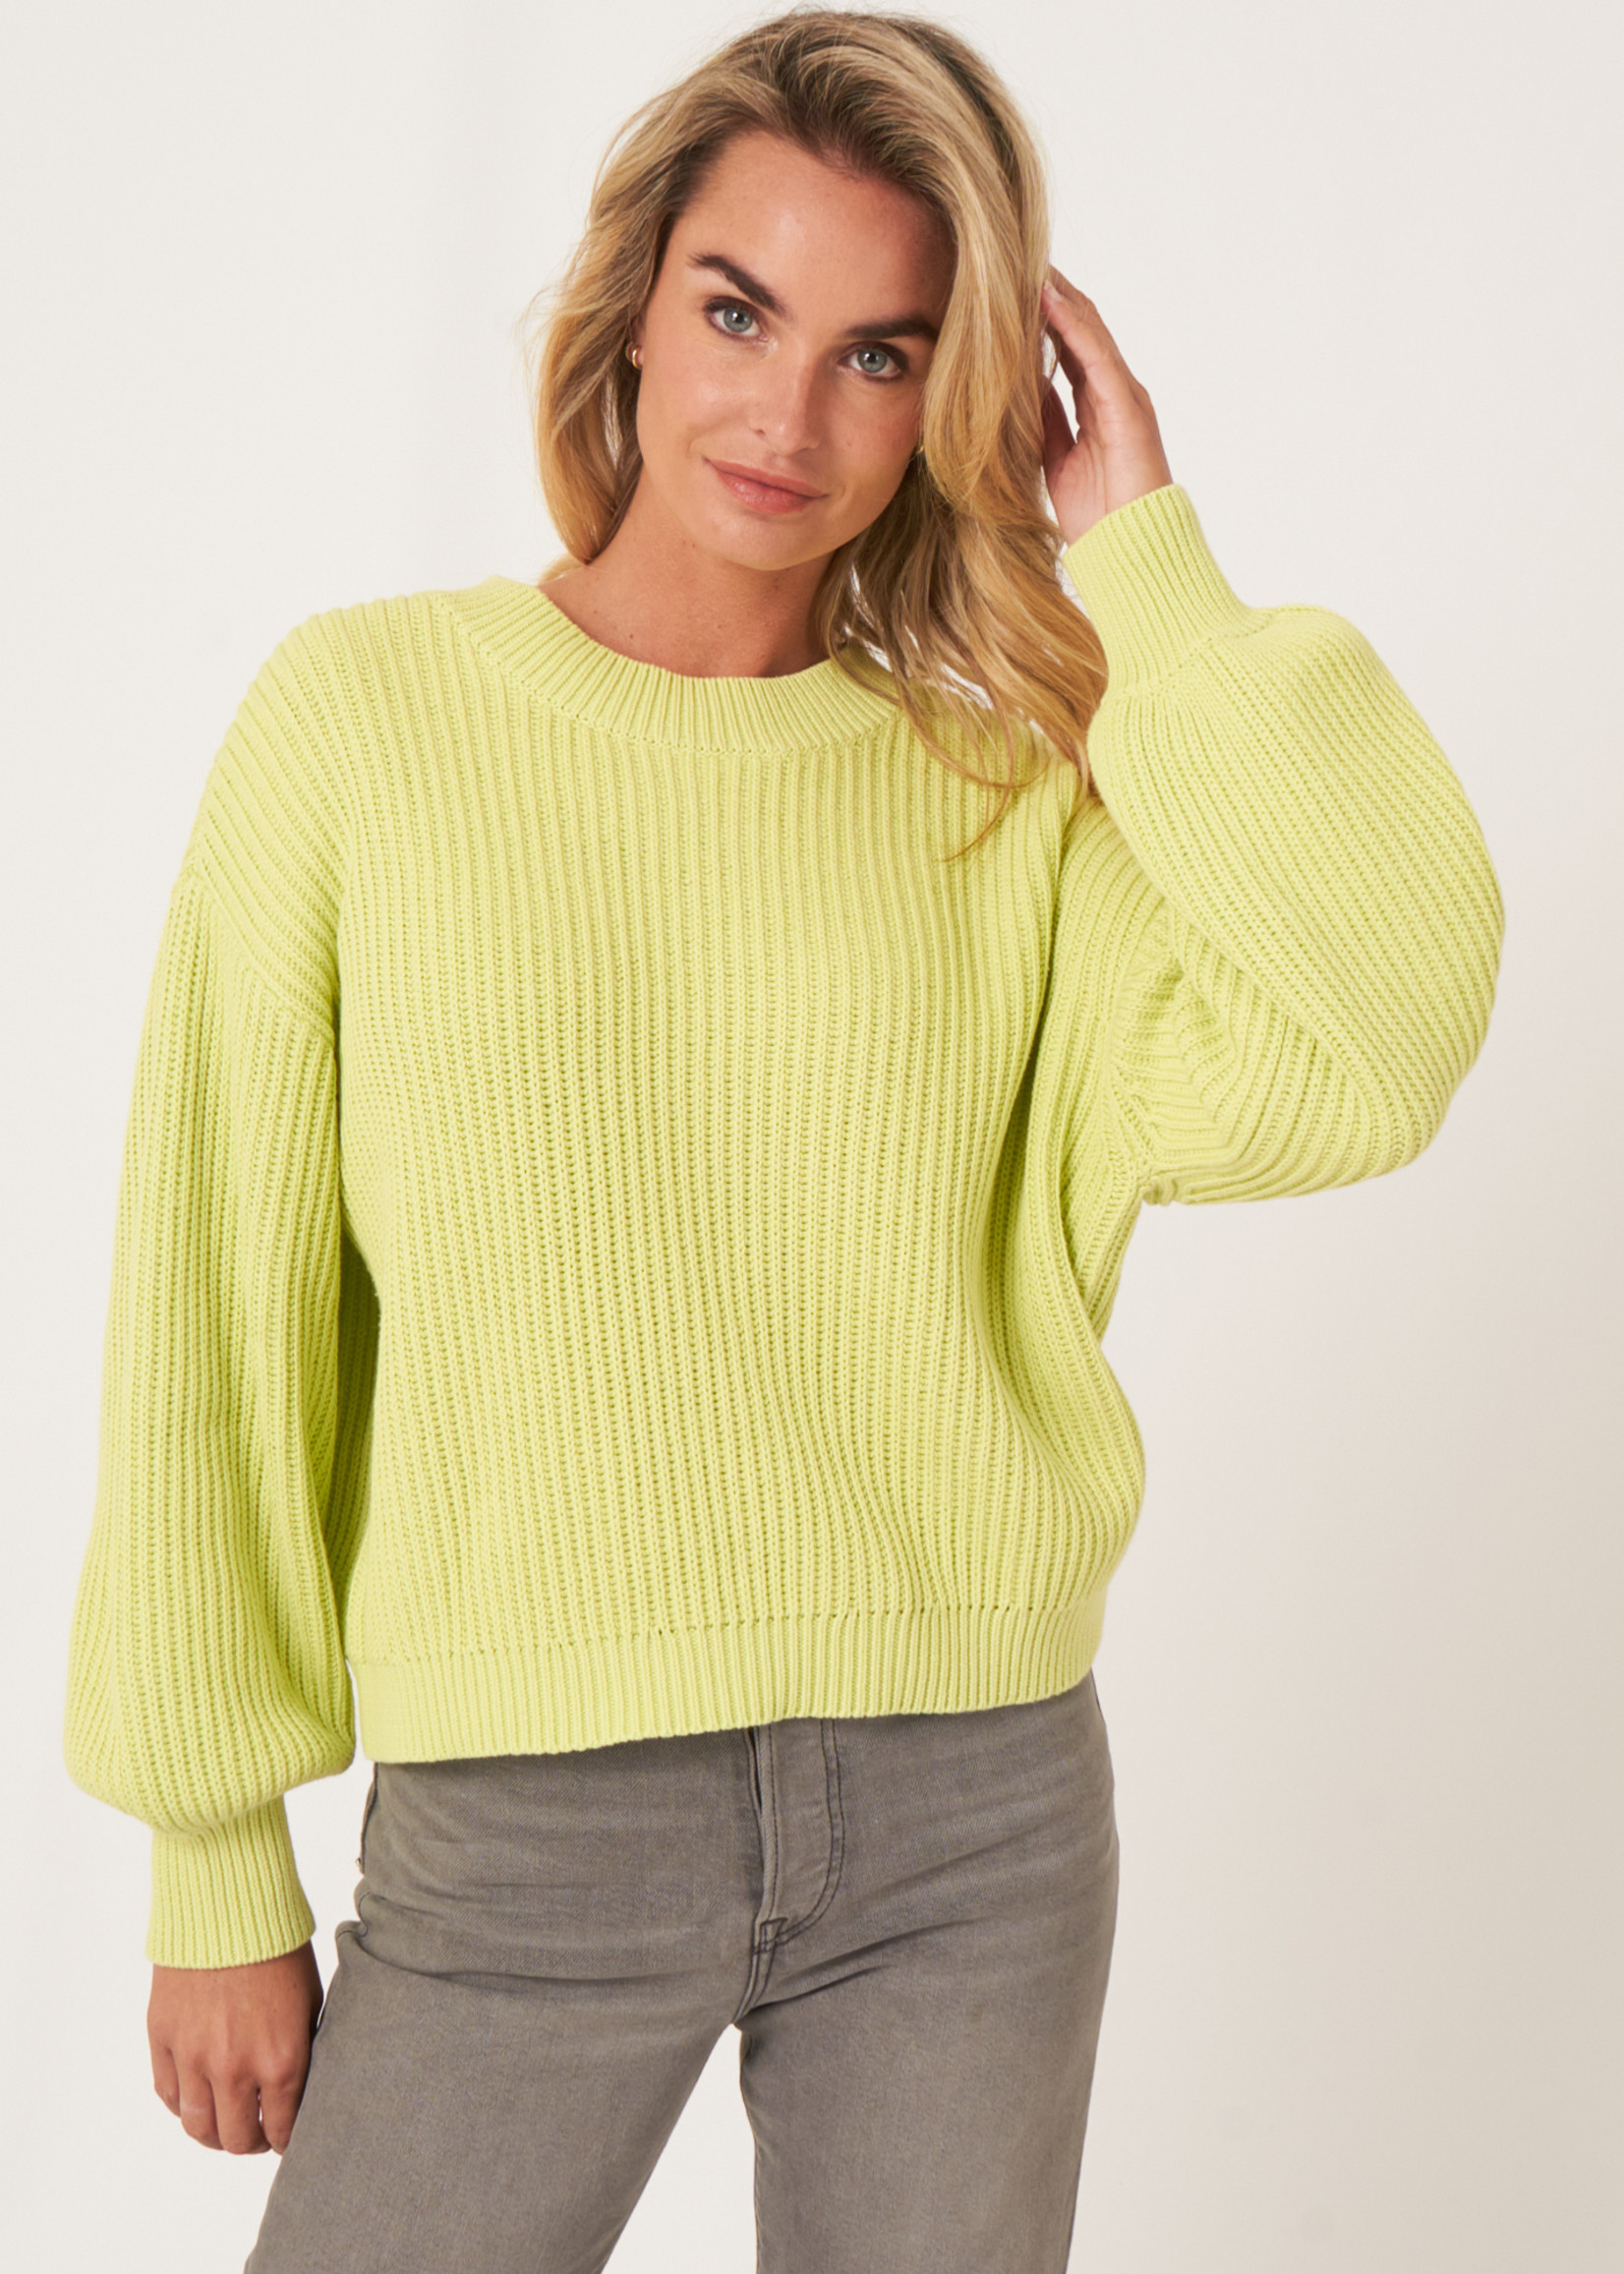 Repeat Repeat cotton knit pullover 400882